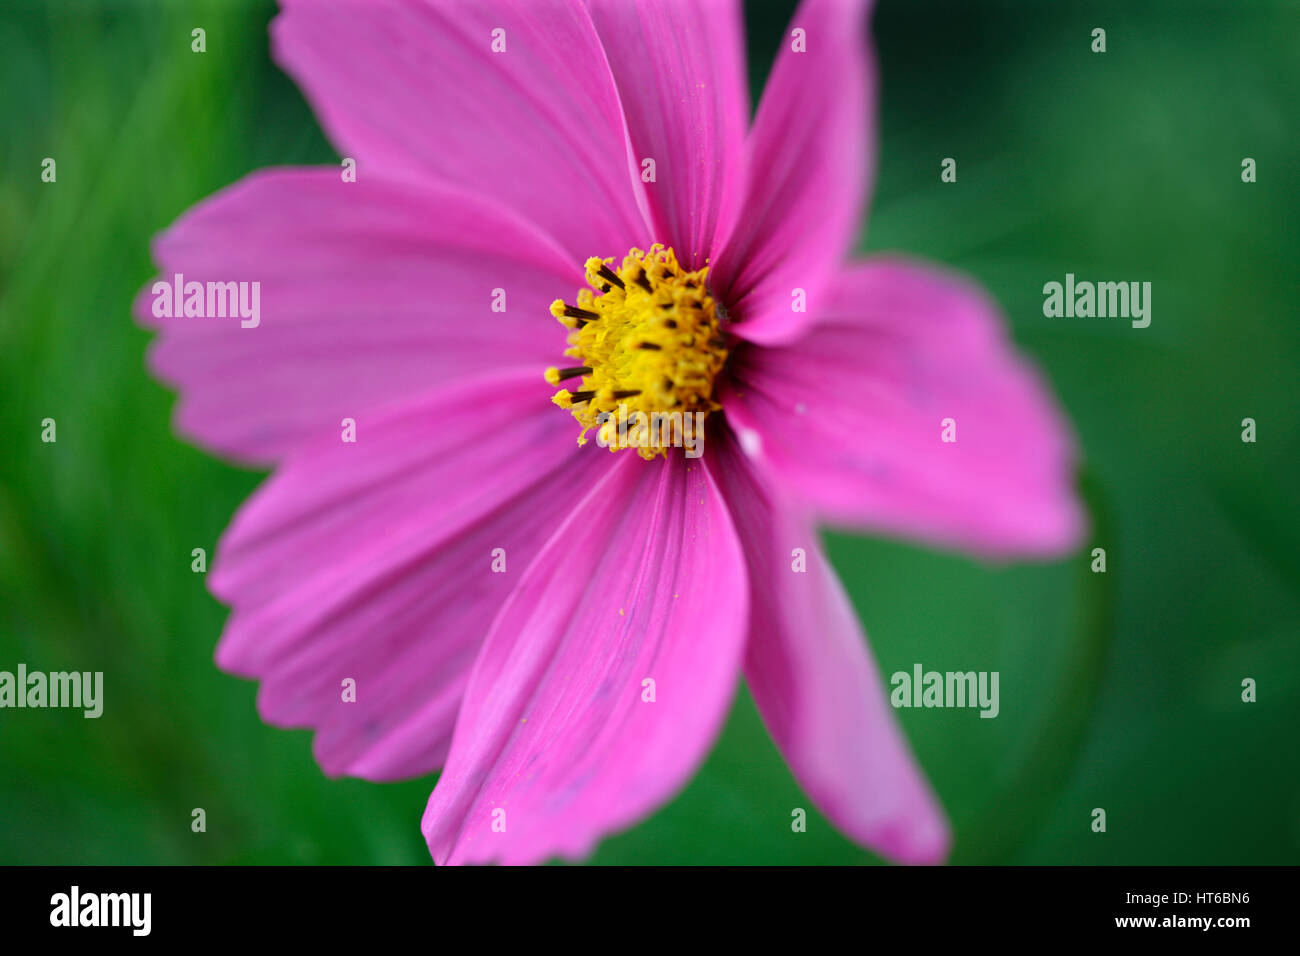 stunning pink cosmos sonata, soft focus and ethereal Jane Ann Butler Photography  JABP1856 Stock Photo